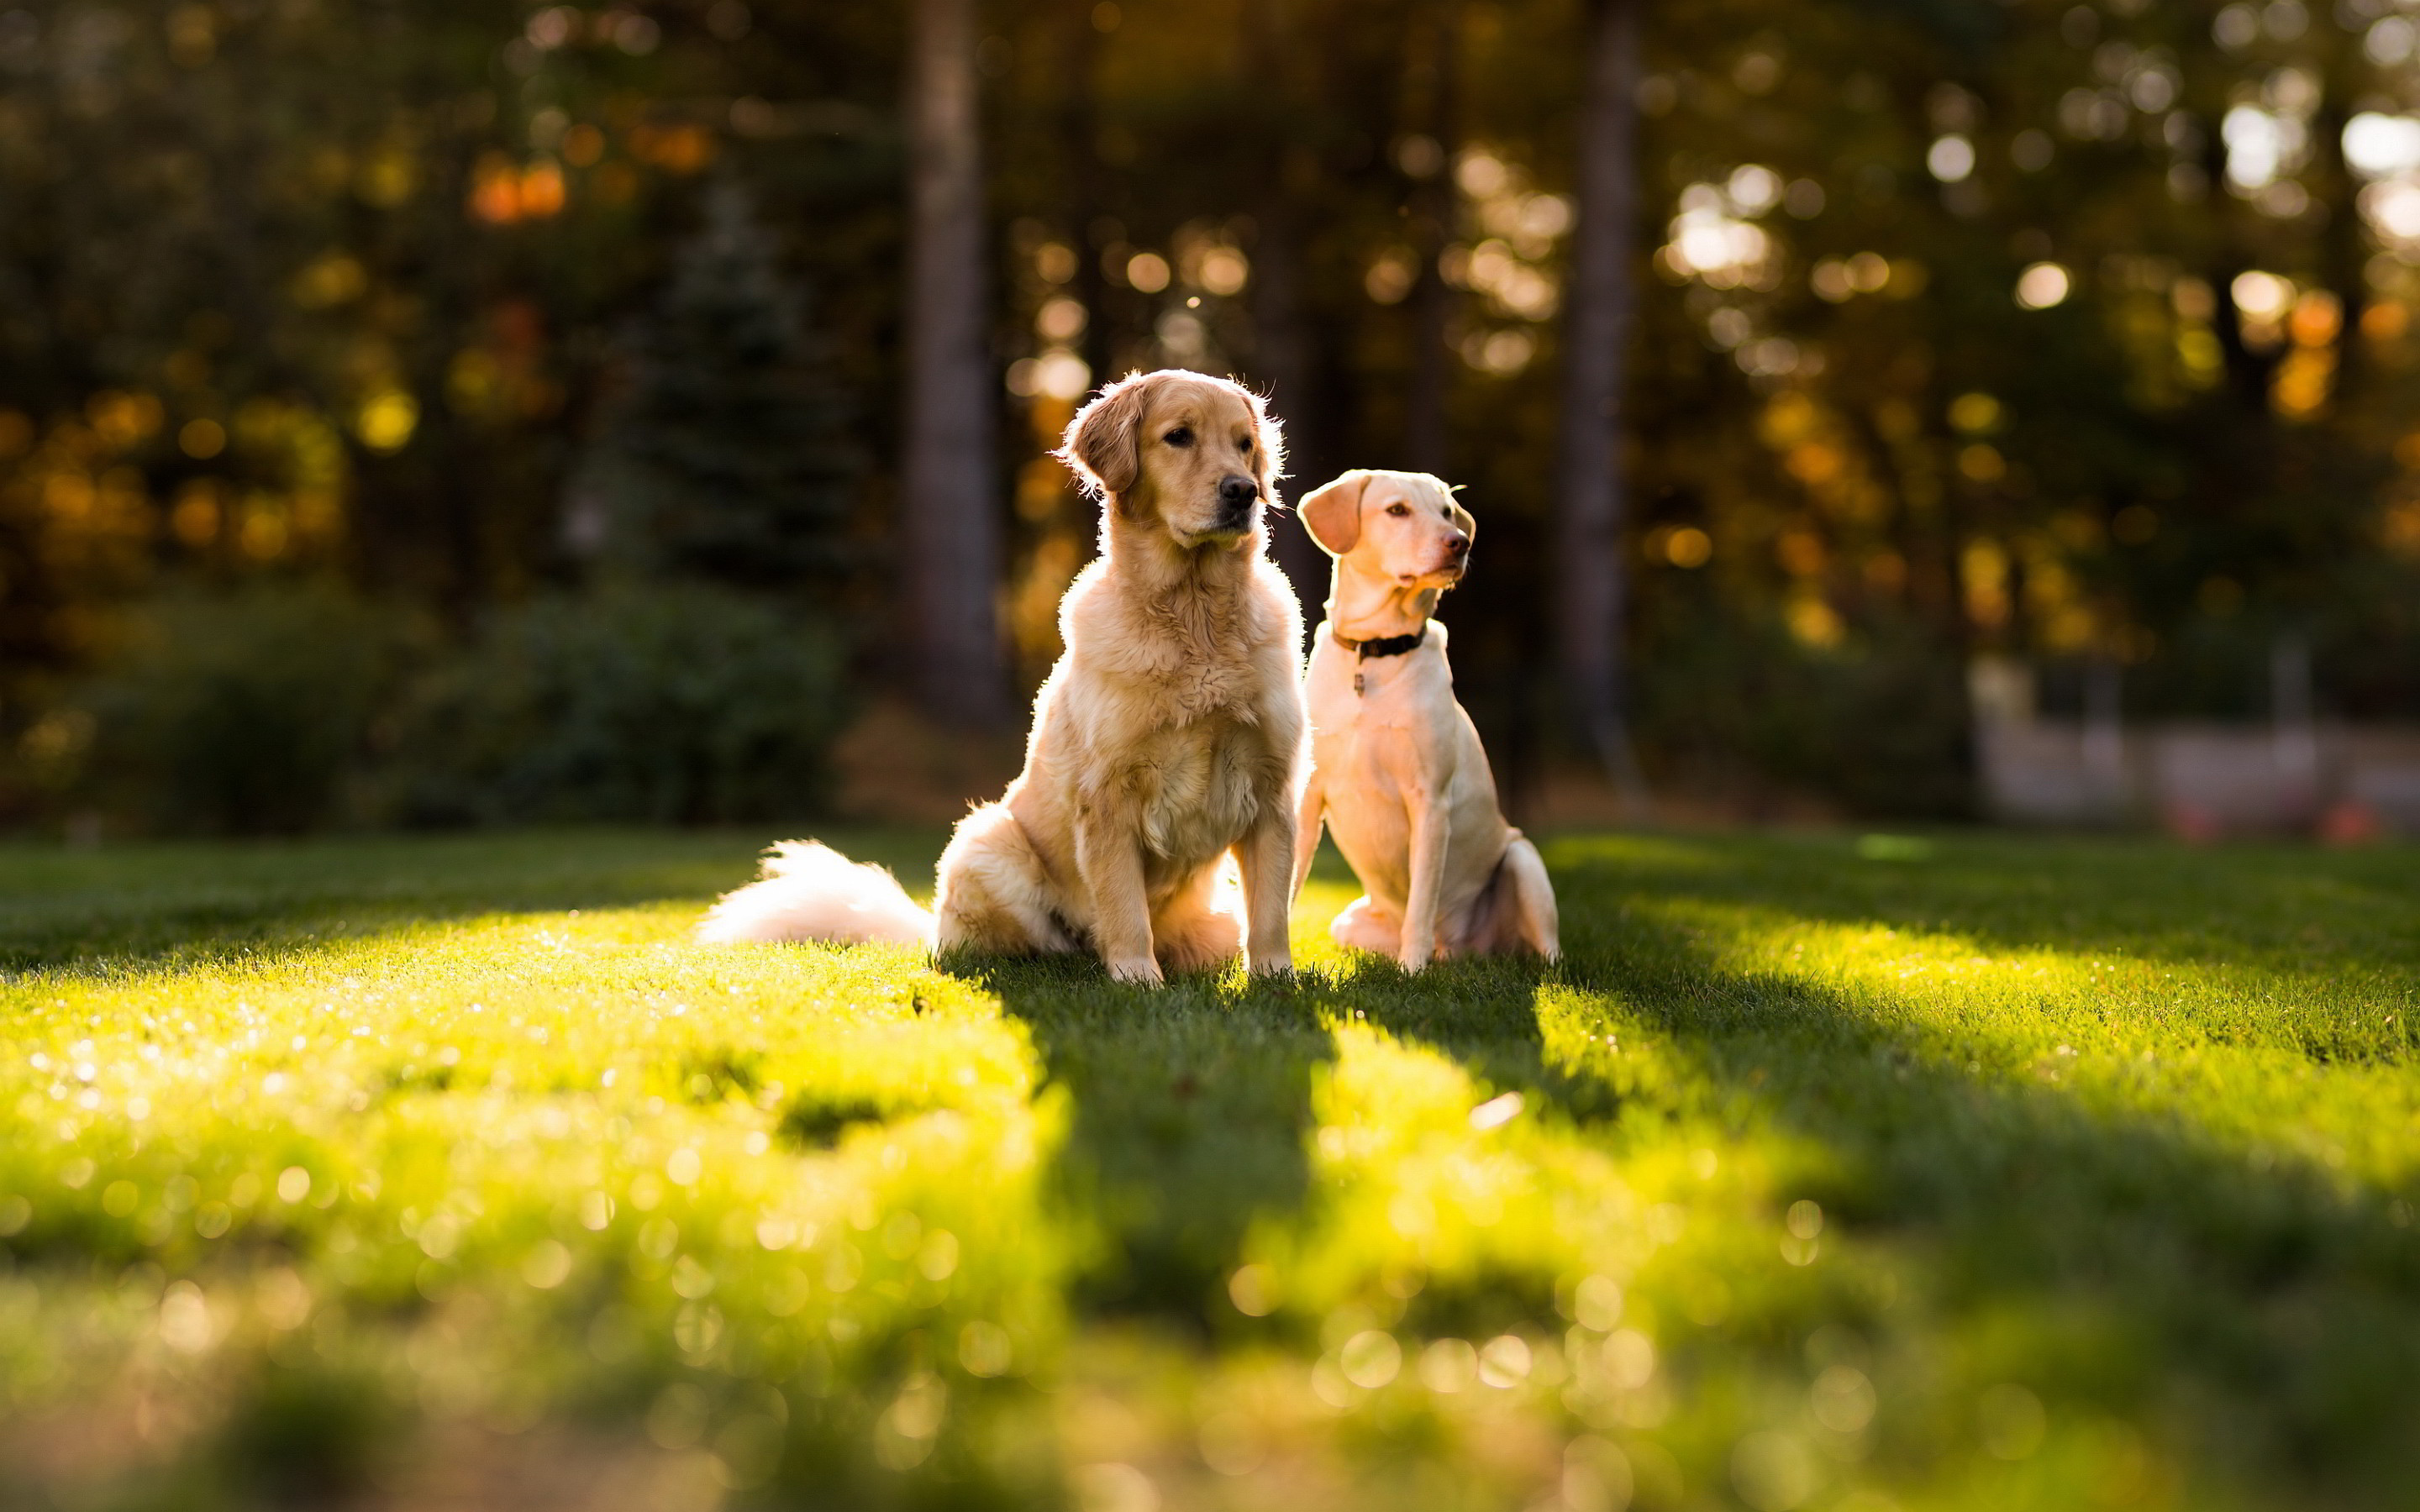 2880x1800 Golden, Retriever, Dogs, Top, Hd, Wallpapers, Free, Download, Dog, Animals,  Images, Cute, Pets, Dog Eye, 2880Ã1800 Wallpaper HD